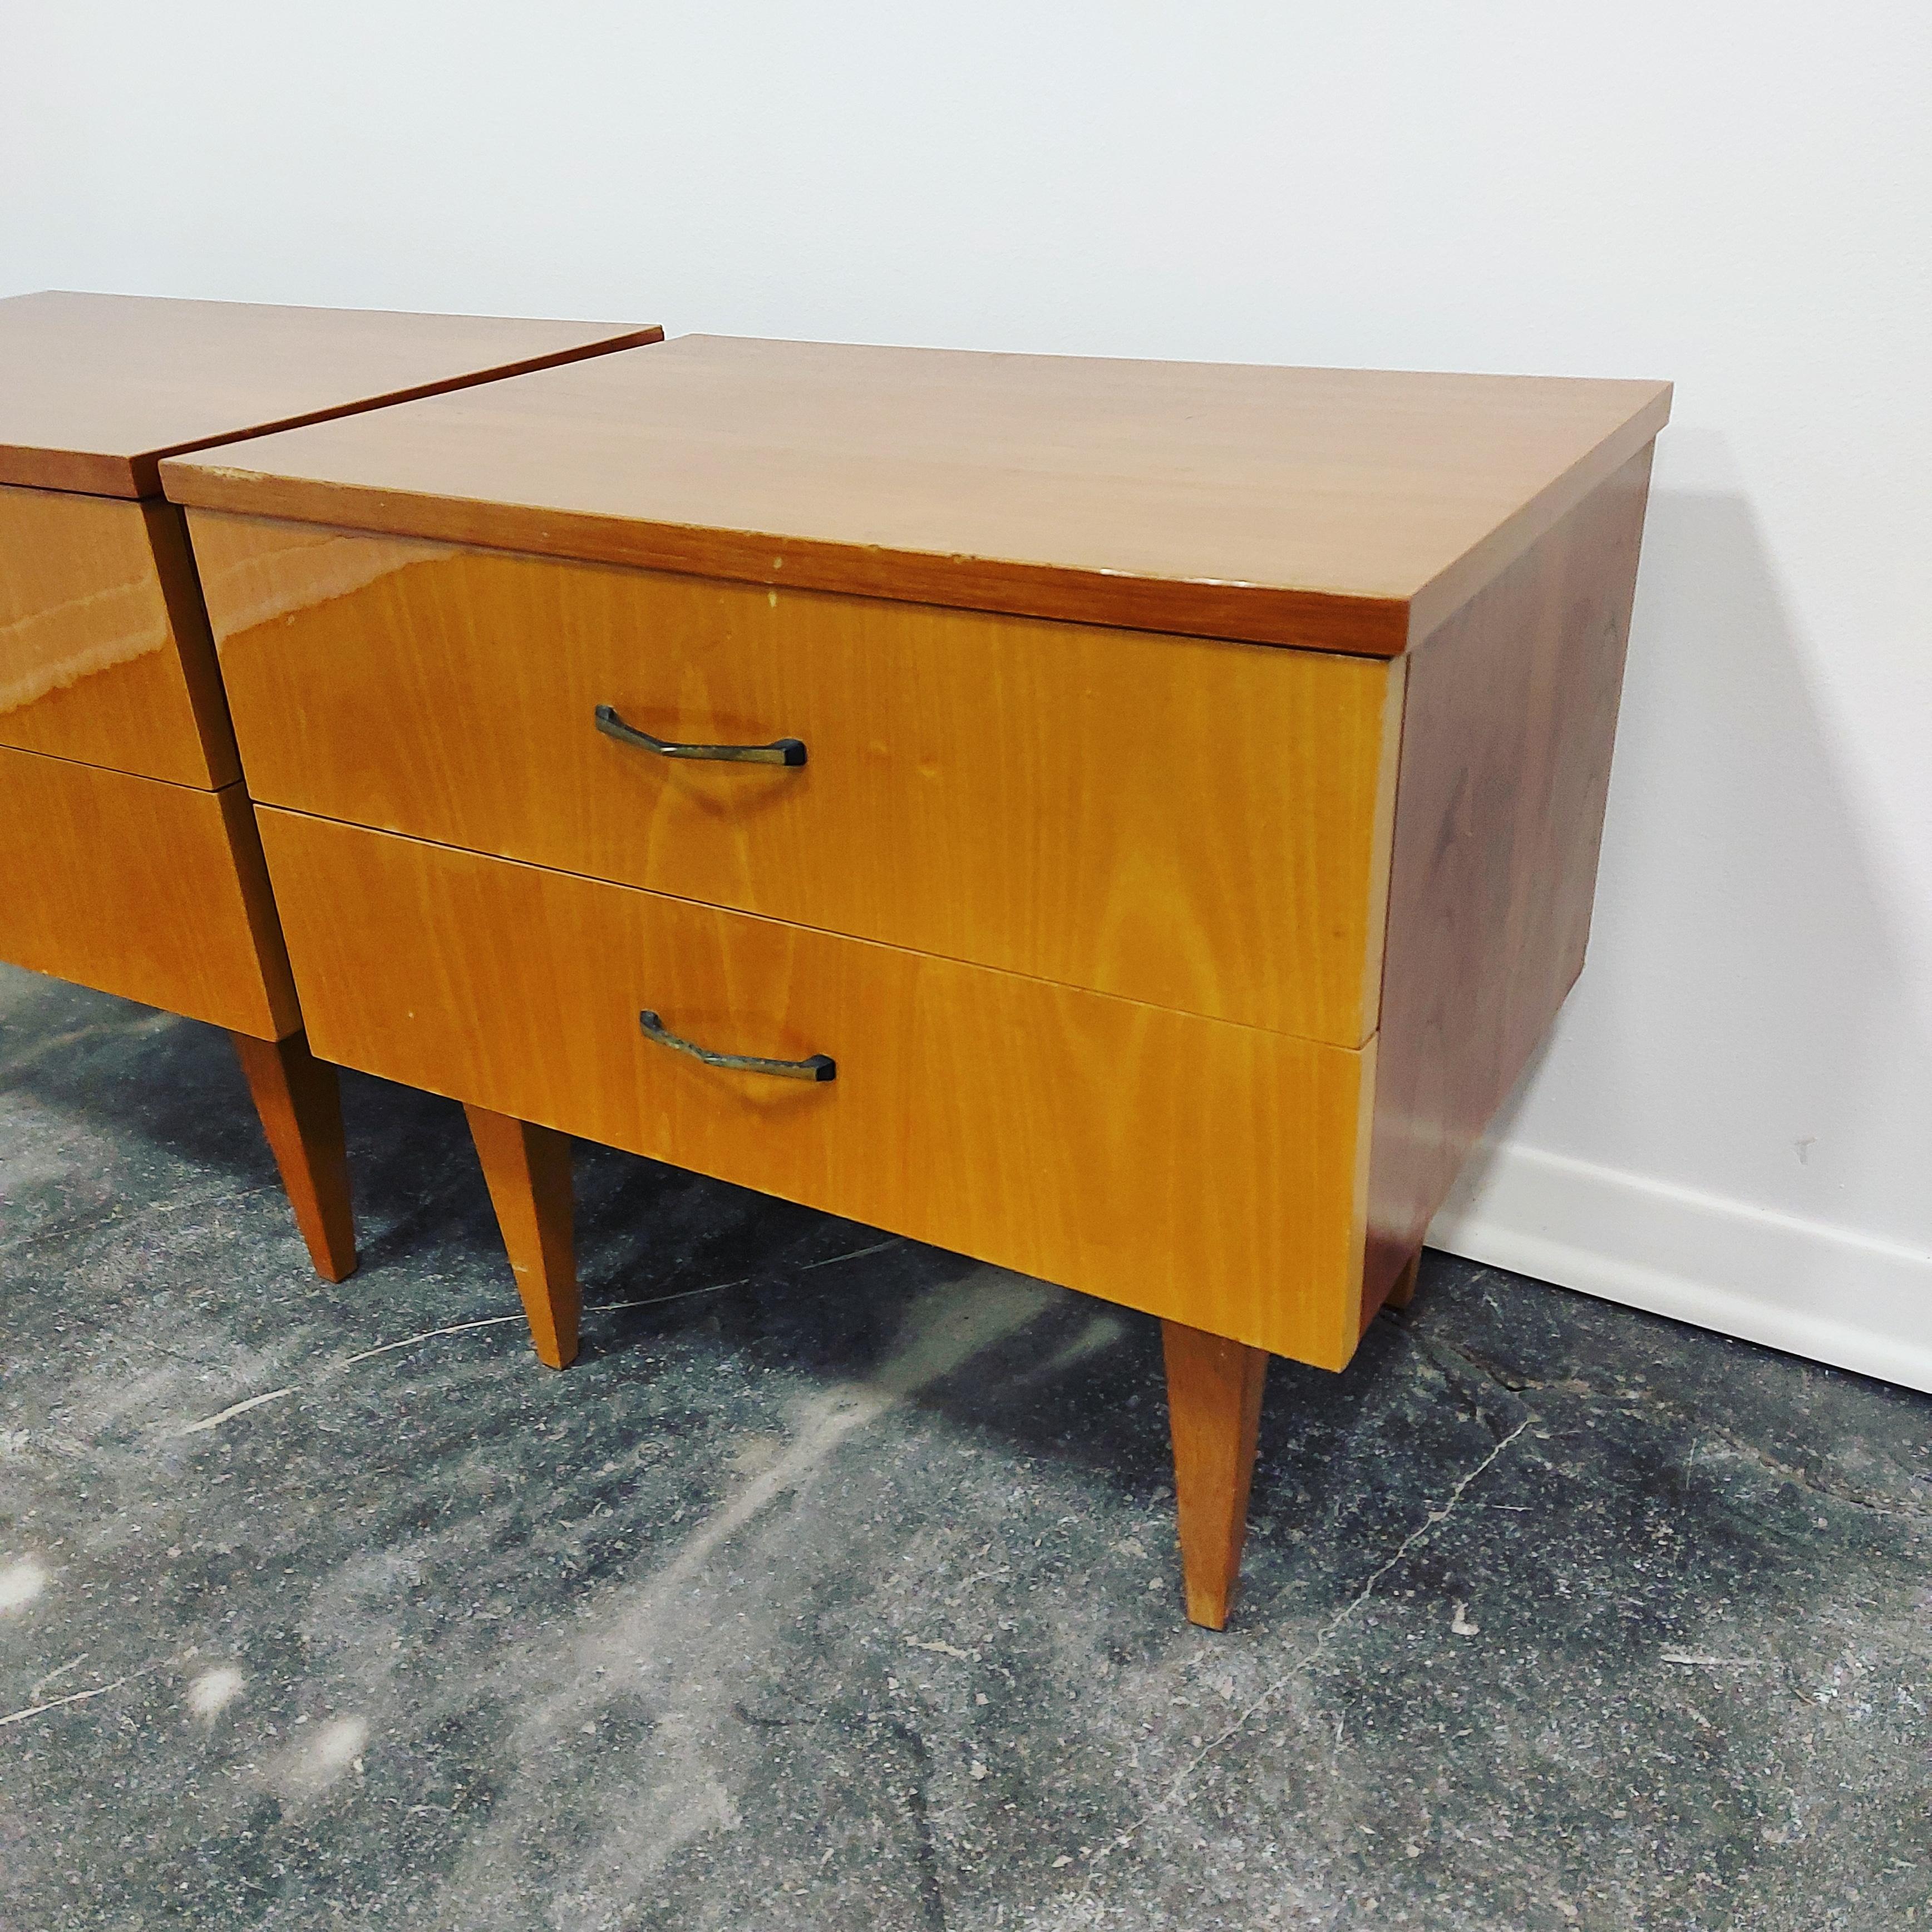 Pair of nightstands/bedside tables

Material: wood, plywood, furnished

Period: 1970s

Style: midcentury, classic italian

Production: Slovenia/Yugoslavia